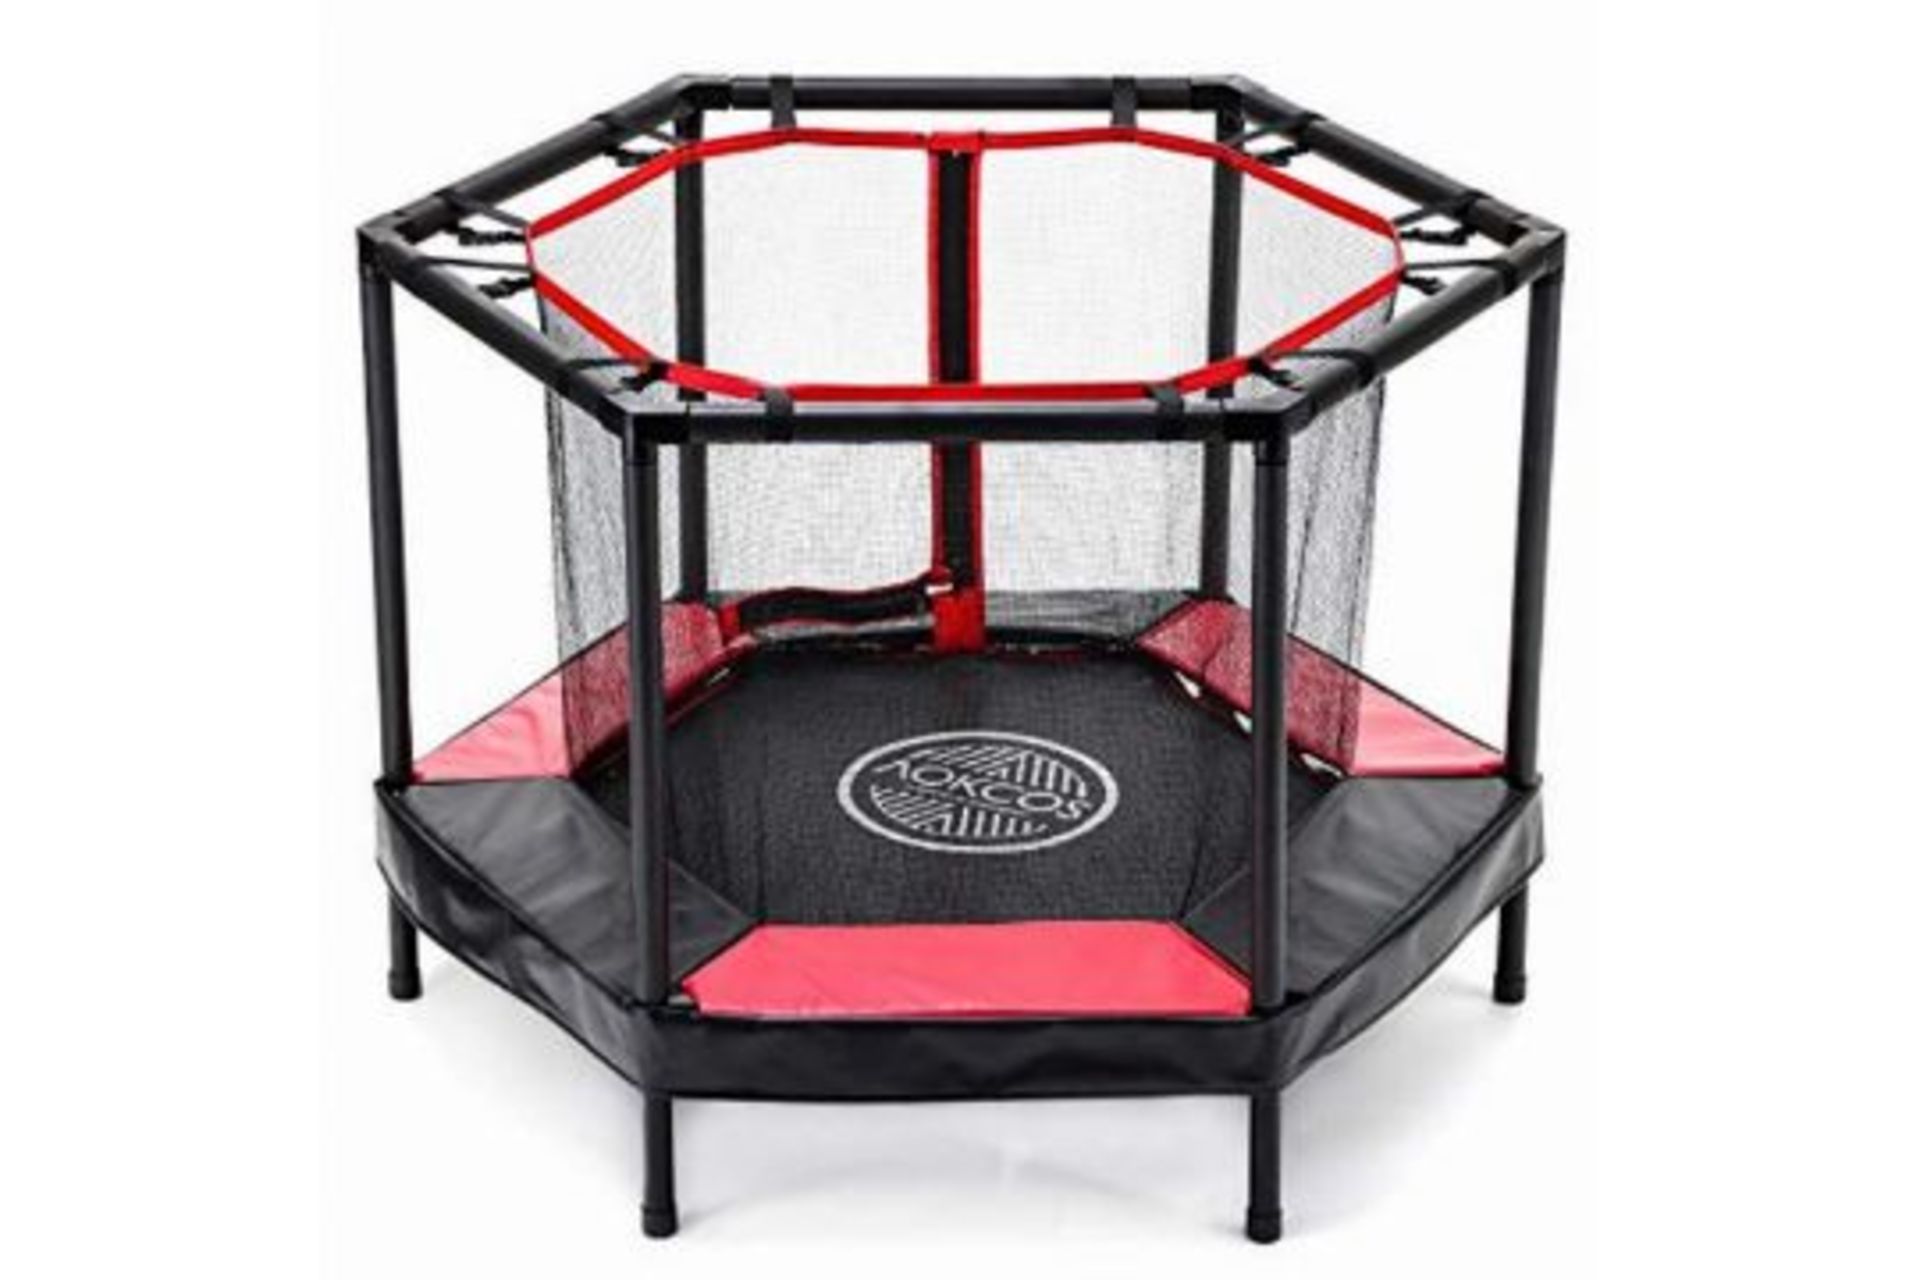 4 x brand new Kids Trampoline 4Ft Mini Trampolines with Enclosure Net and Safety Pad - Small Toddler - Image 2 of 2